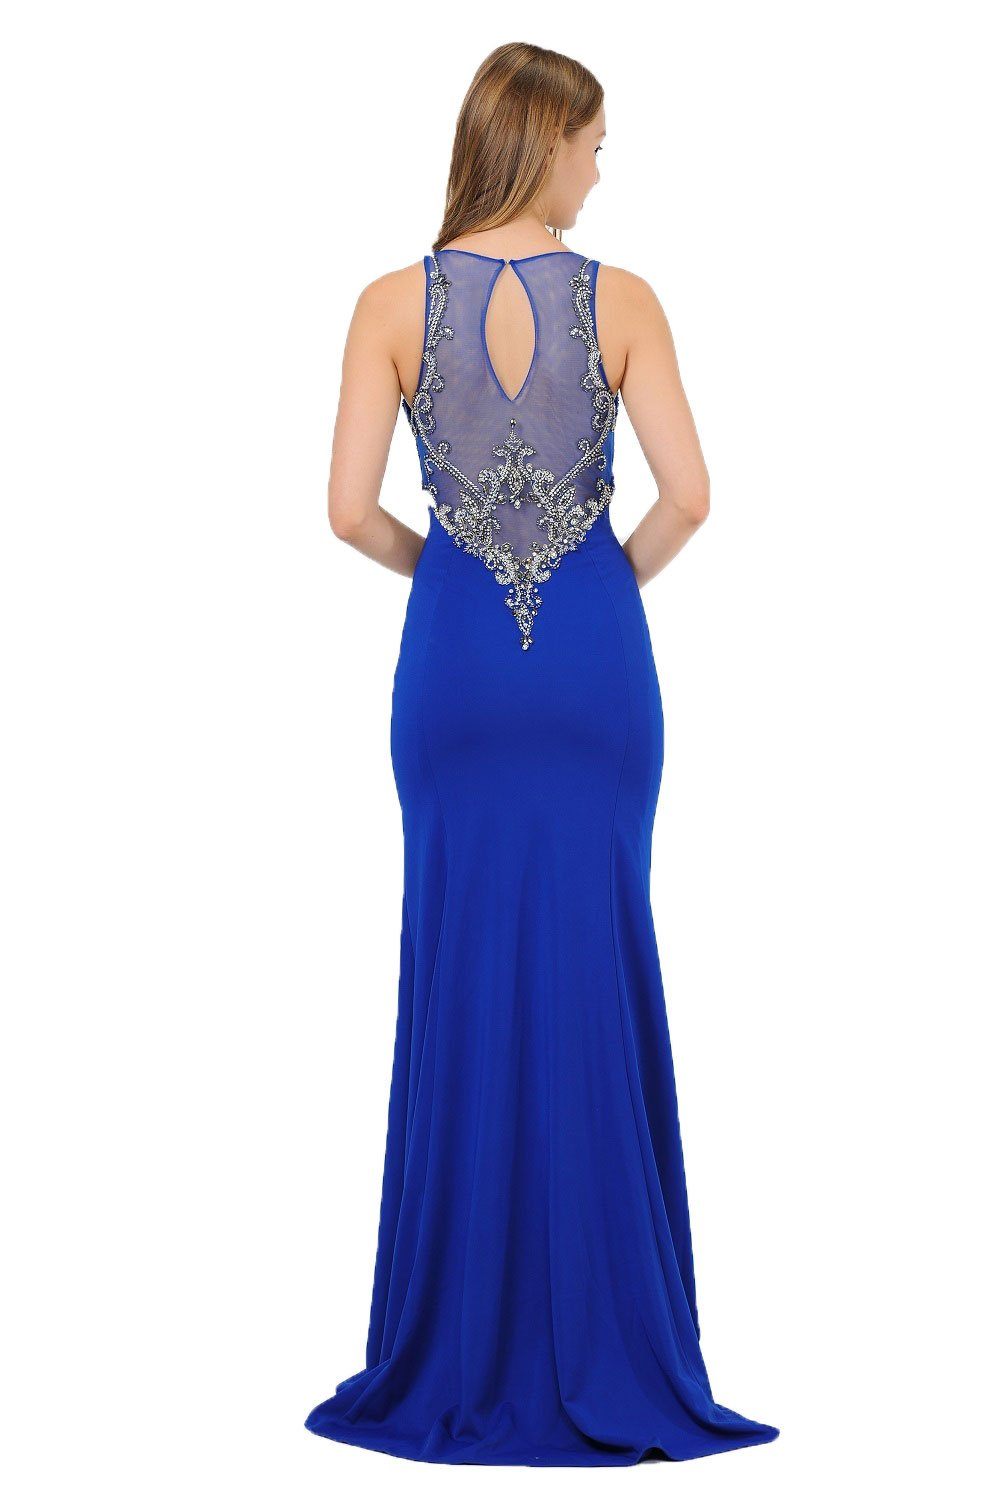 Long Jersey Dress with Sheer Embroidered Bodice by Poly USA 8348-Long Formal Dresses-ABC Fashion